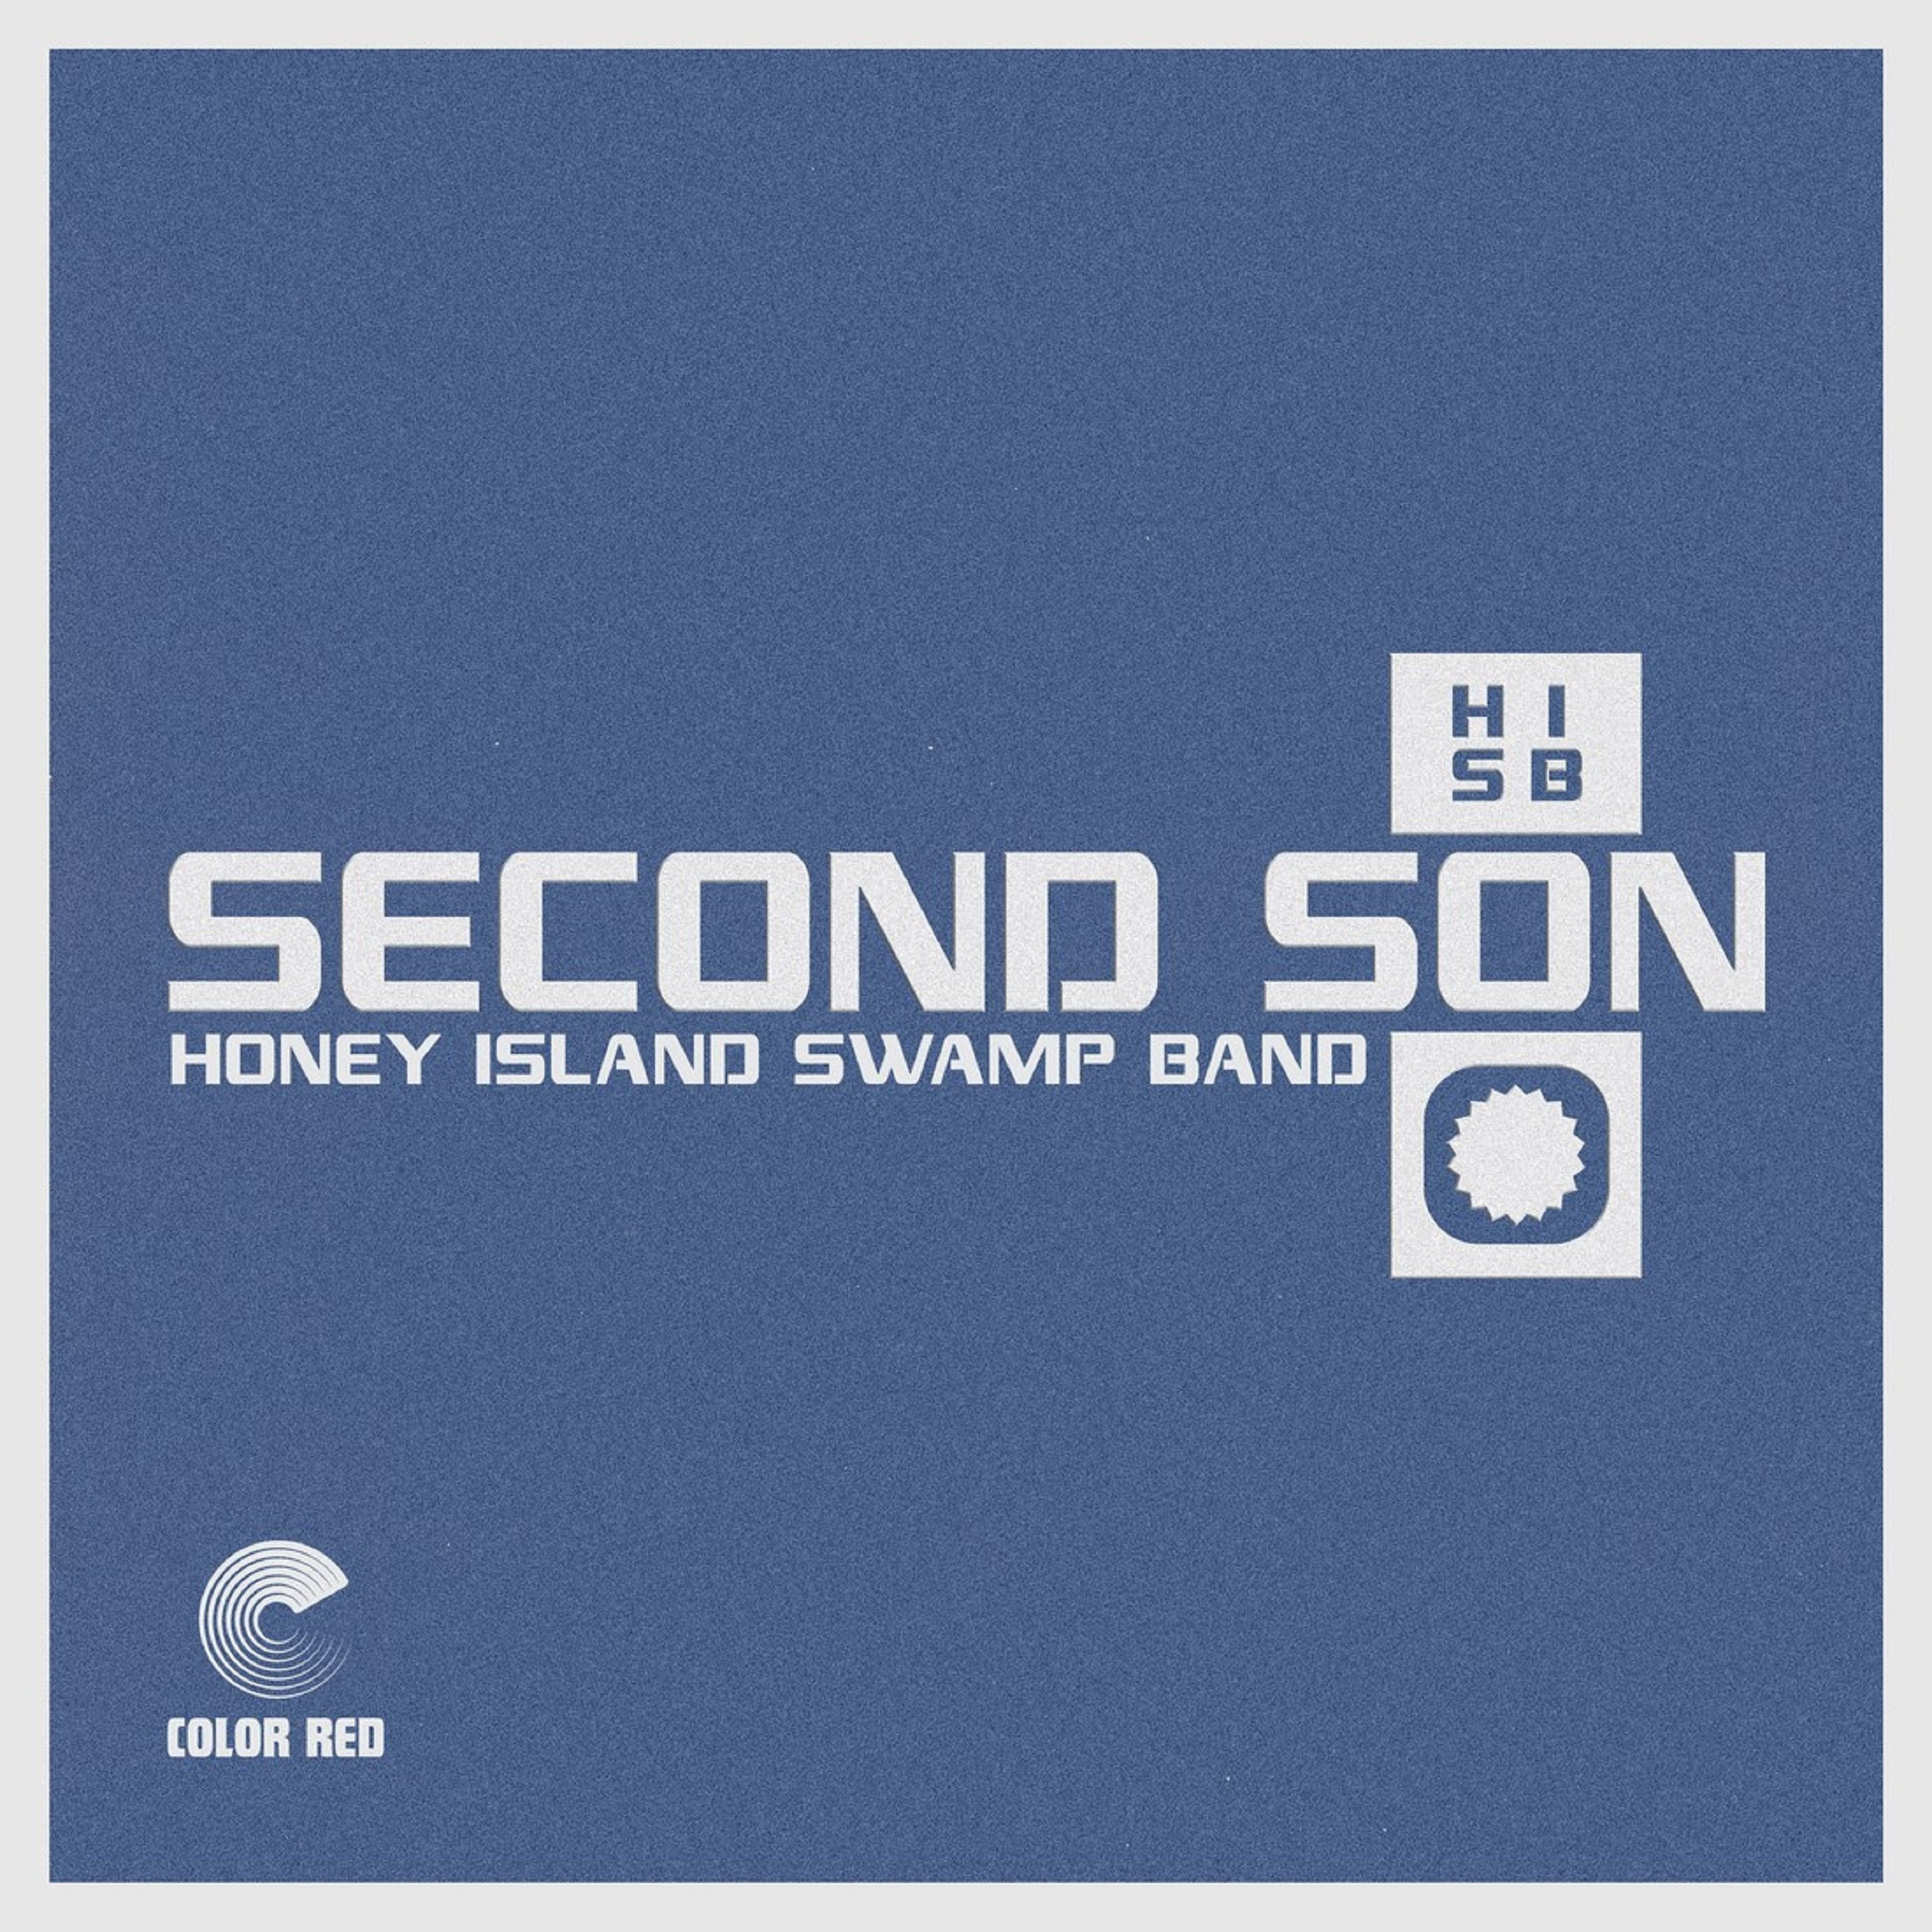 "Second Son" by Honey Island Swamp Band